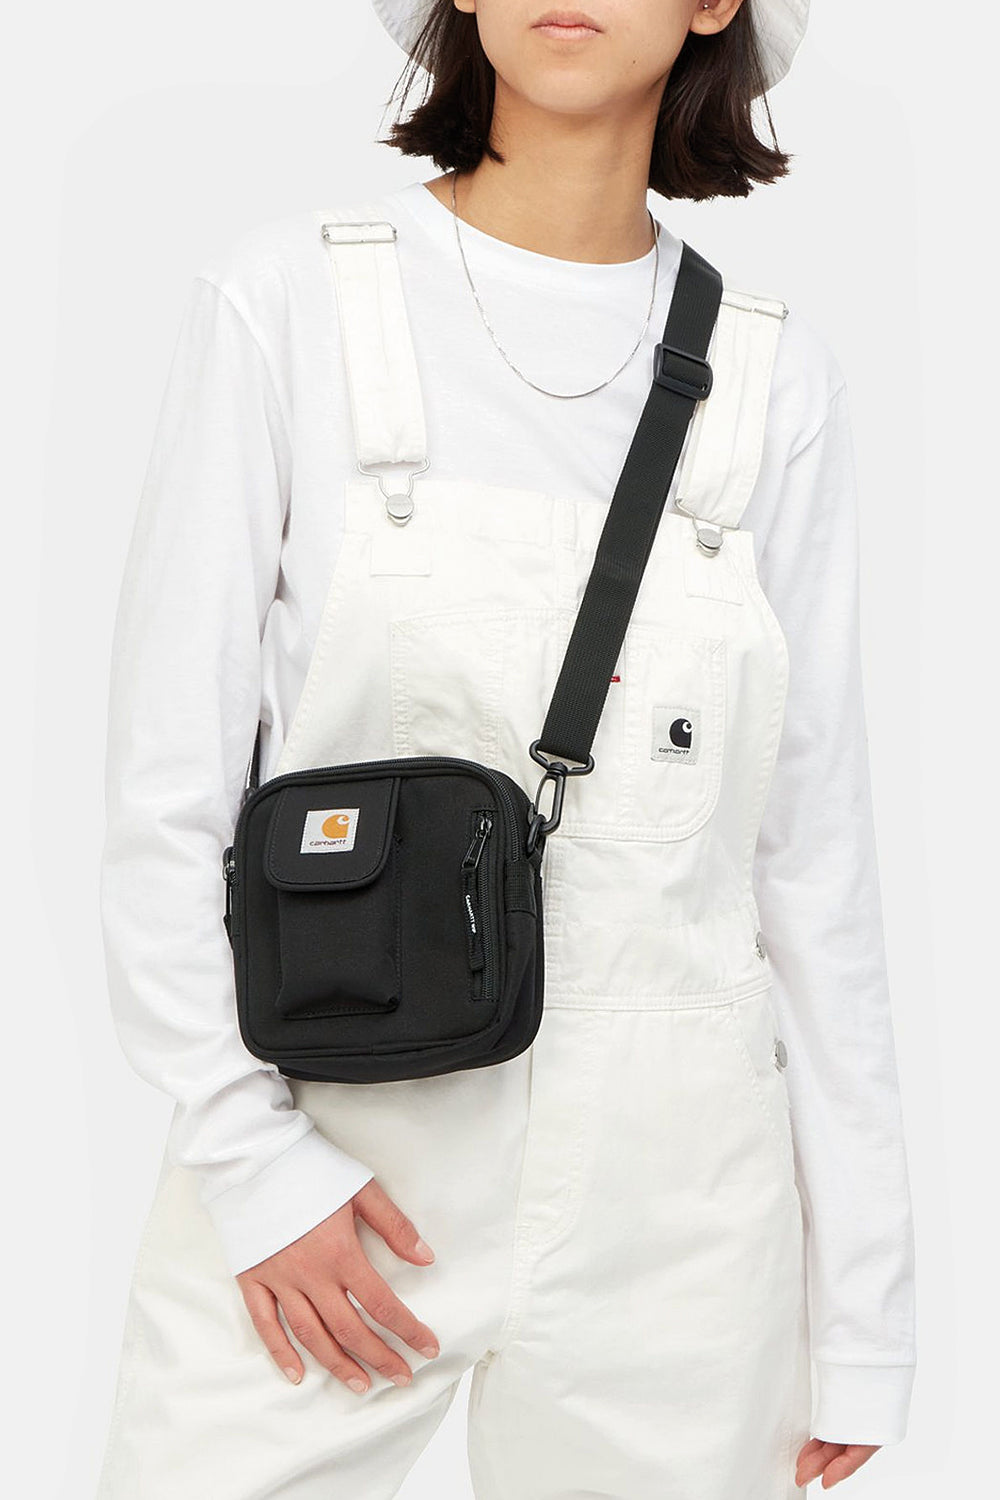 Carhartt WIP Small Essentials Recycled Side Bag (Black) | Number Six